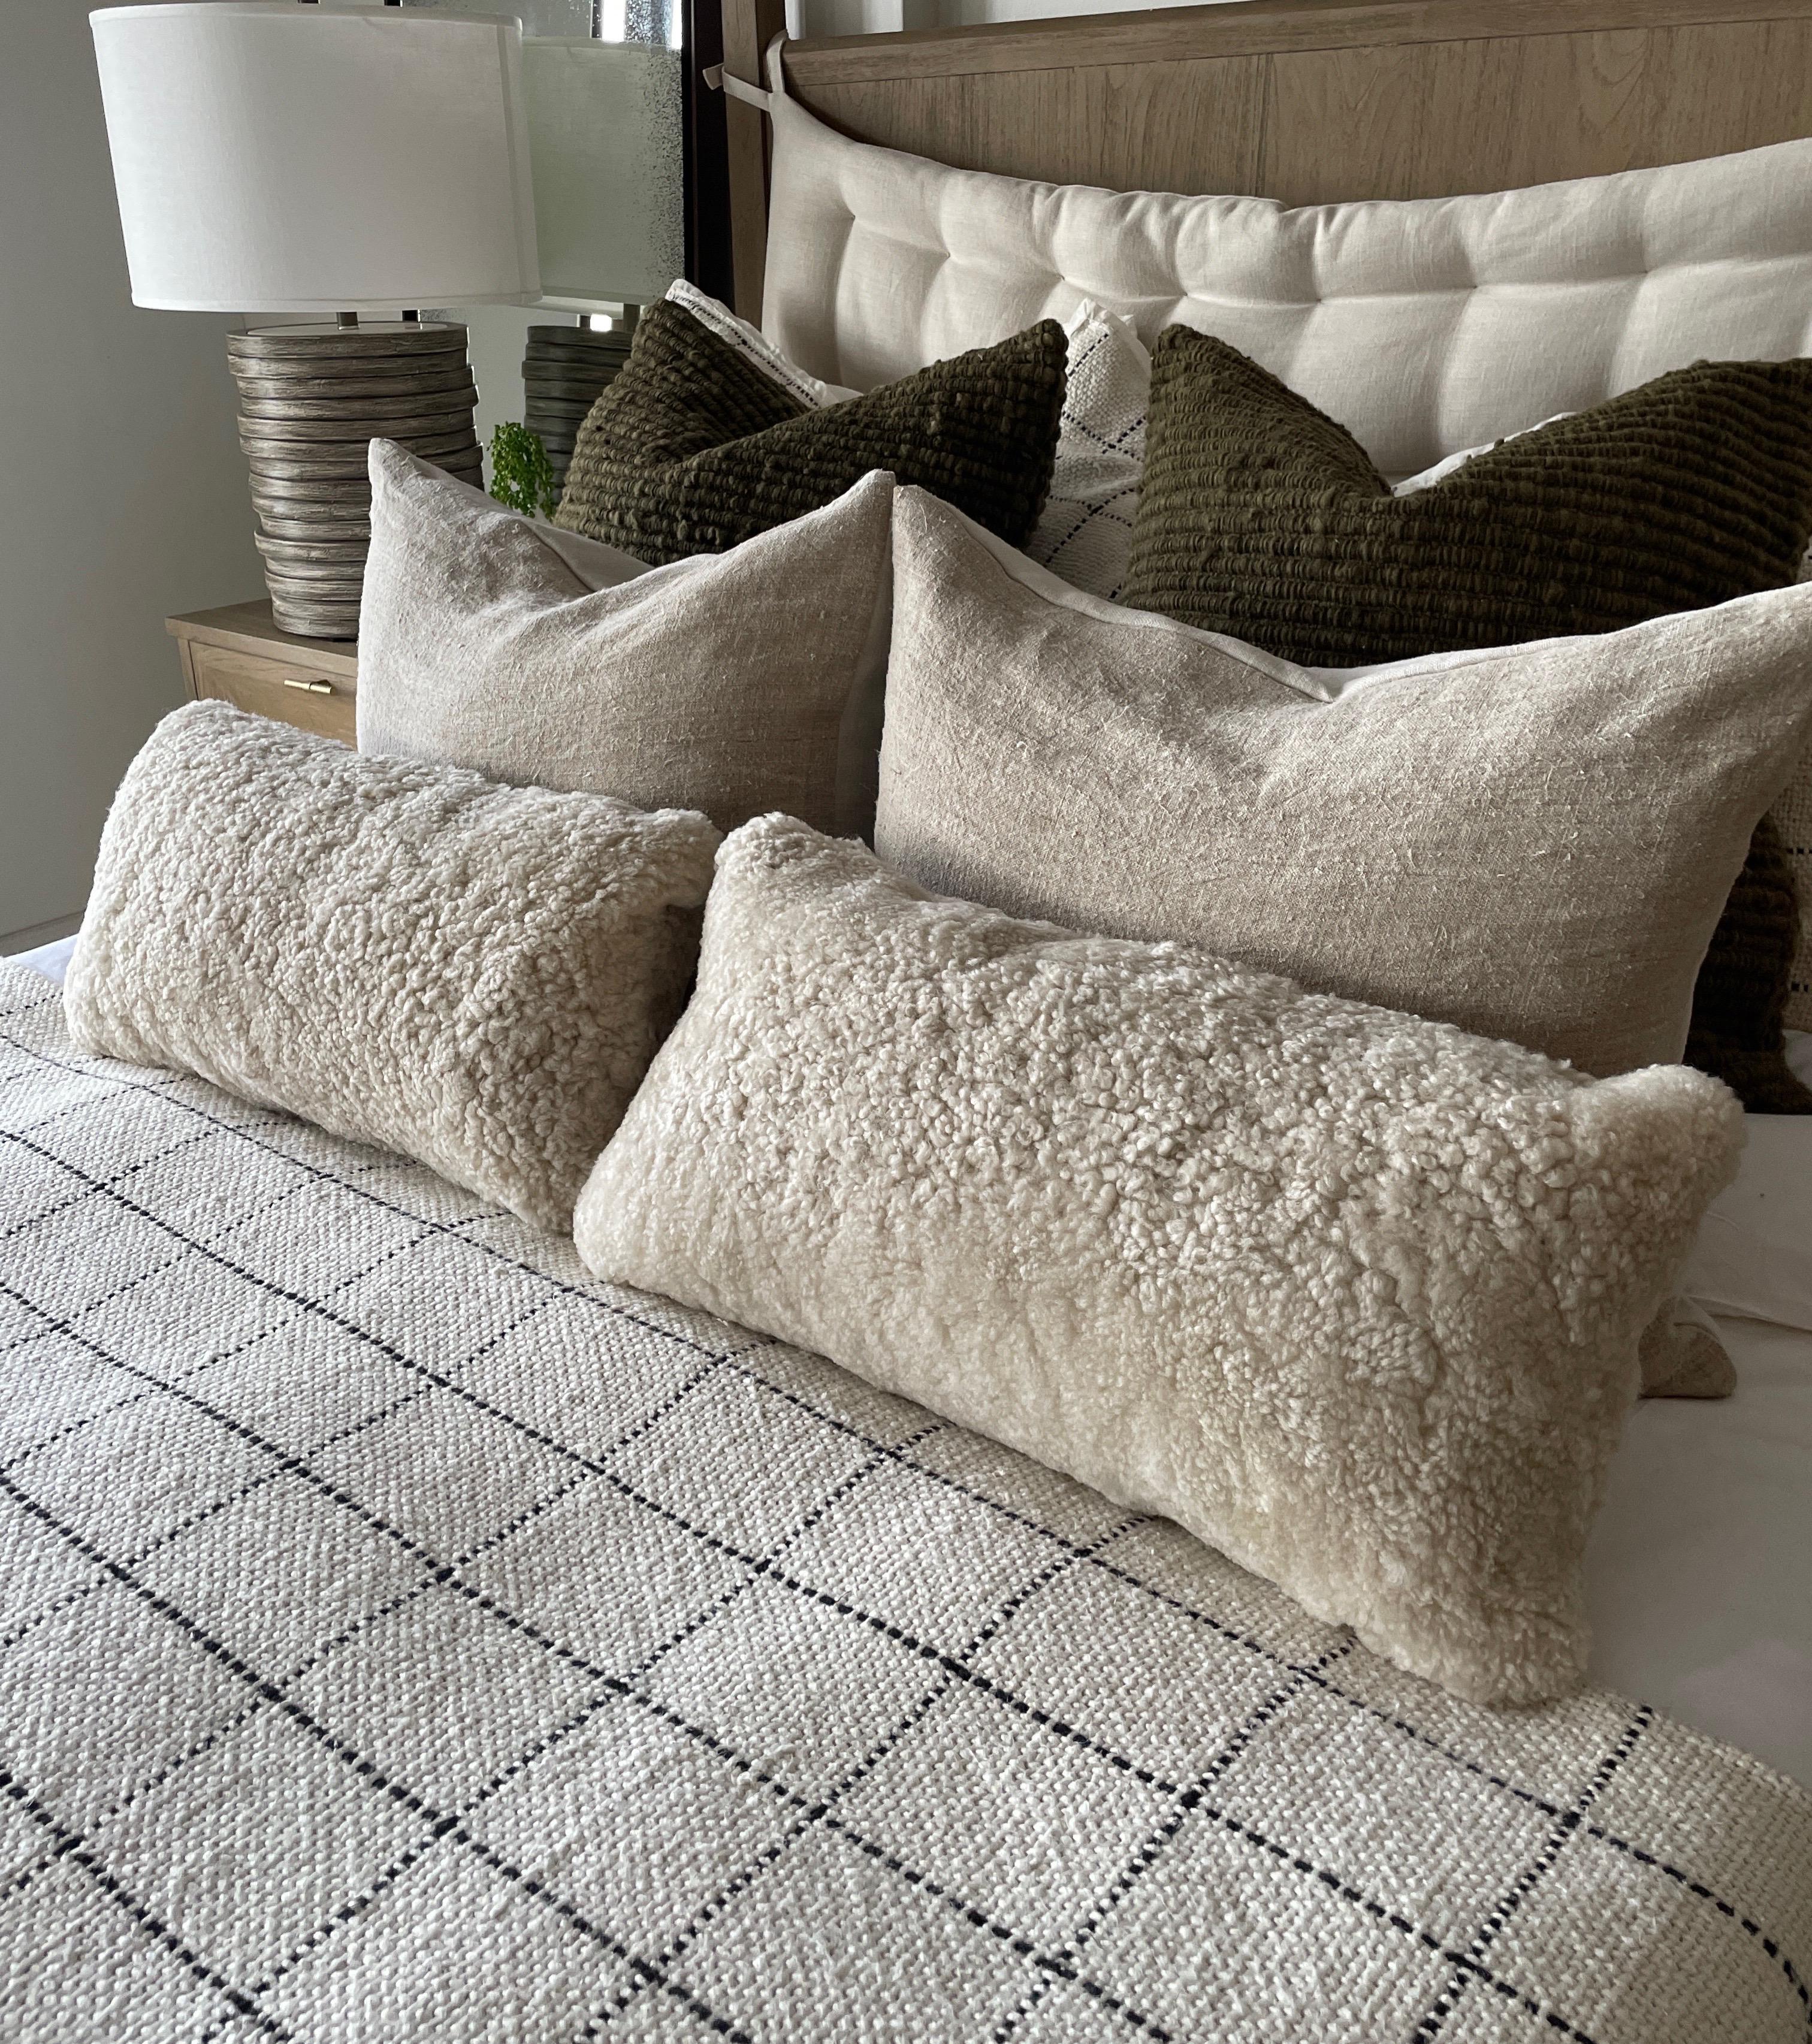 This beautiful rectangular cushion is made of curly sheepskin from New Zealand. The back is also made of natural sheepskin. This makes the cushion even softer and gives it a complete, warm look.
Hidden zipper closure
Quality: Superior Plush